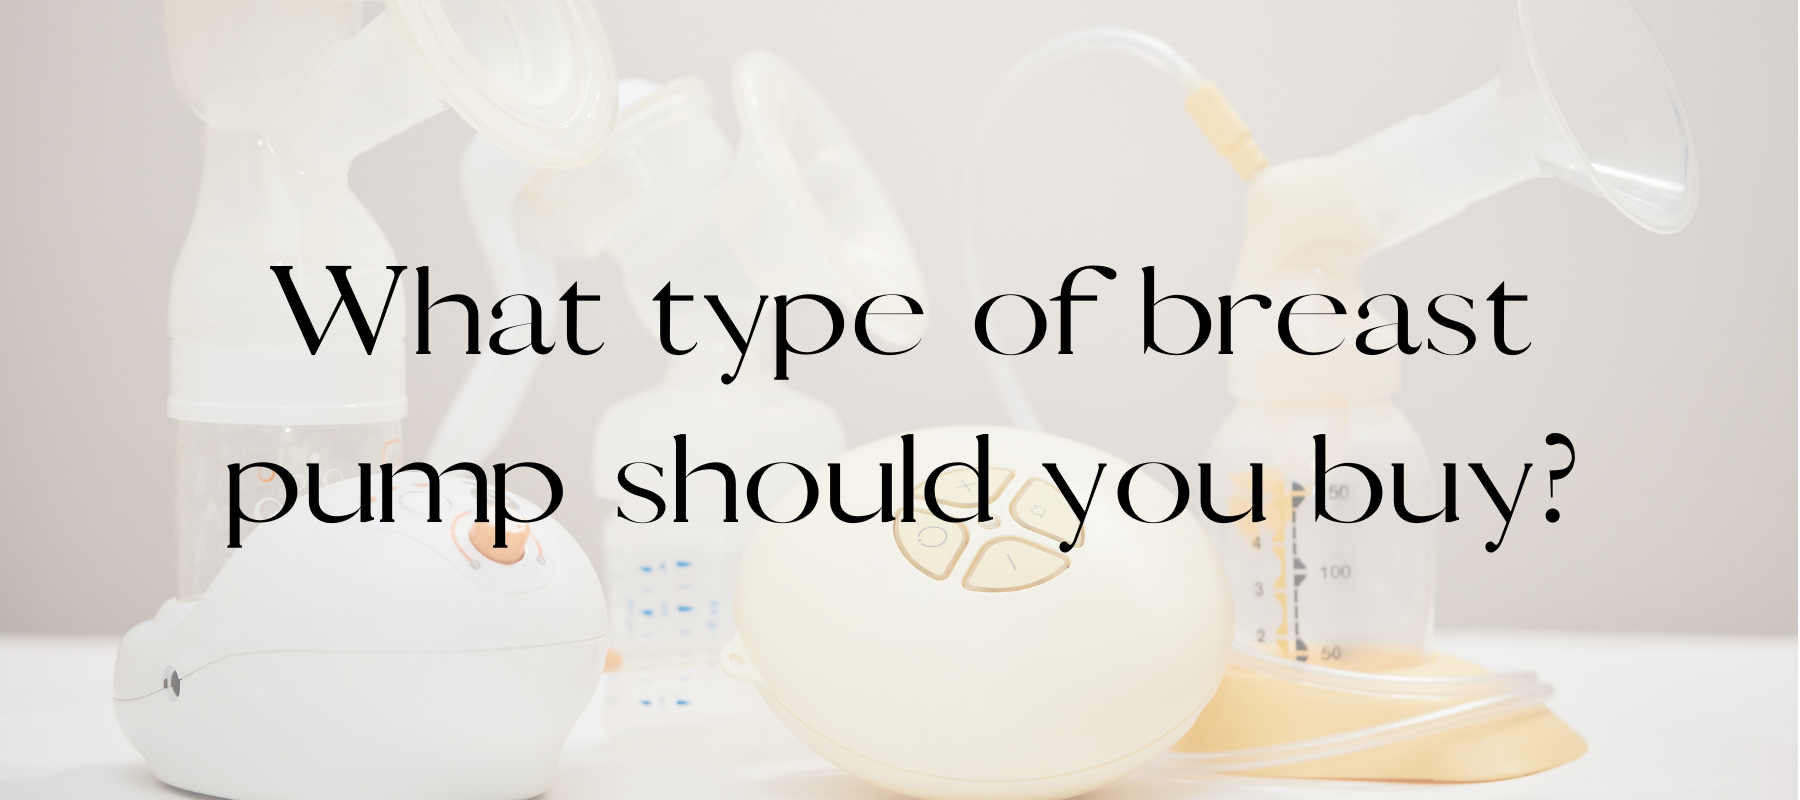 What type of breast pump should you buy?